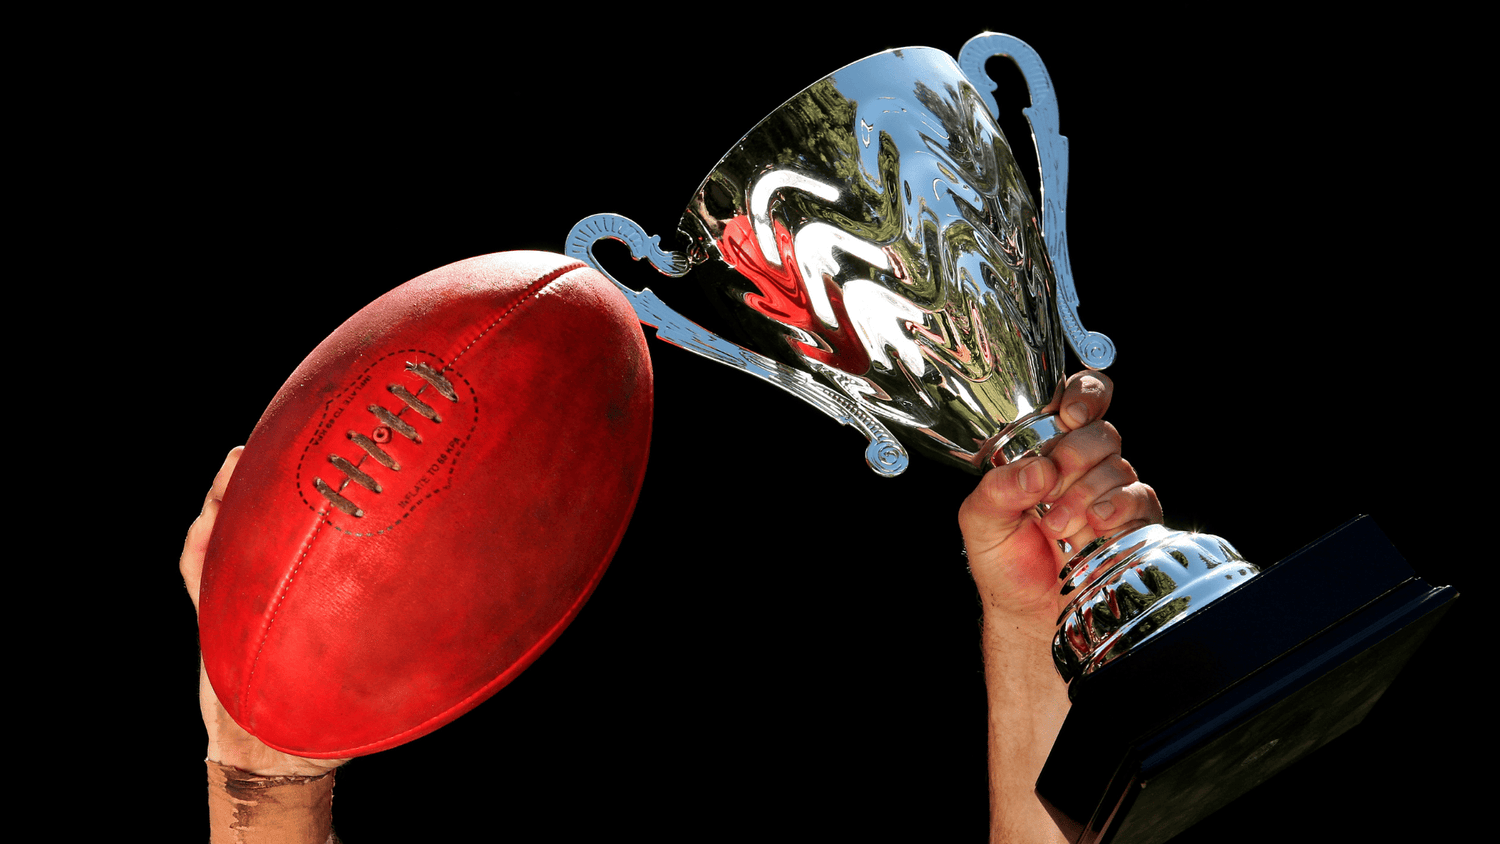 Traditional Trophies - Aussie Rules